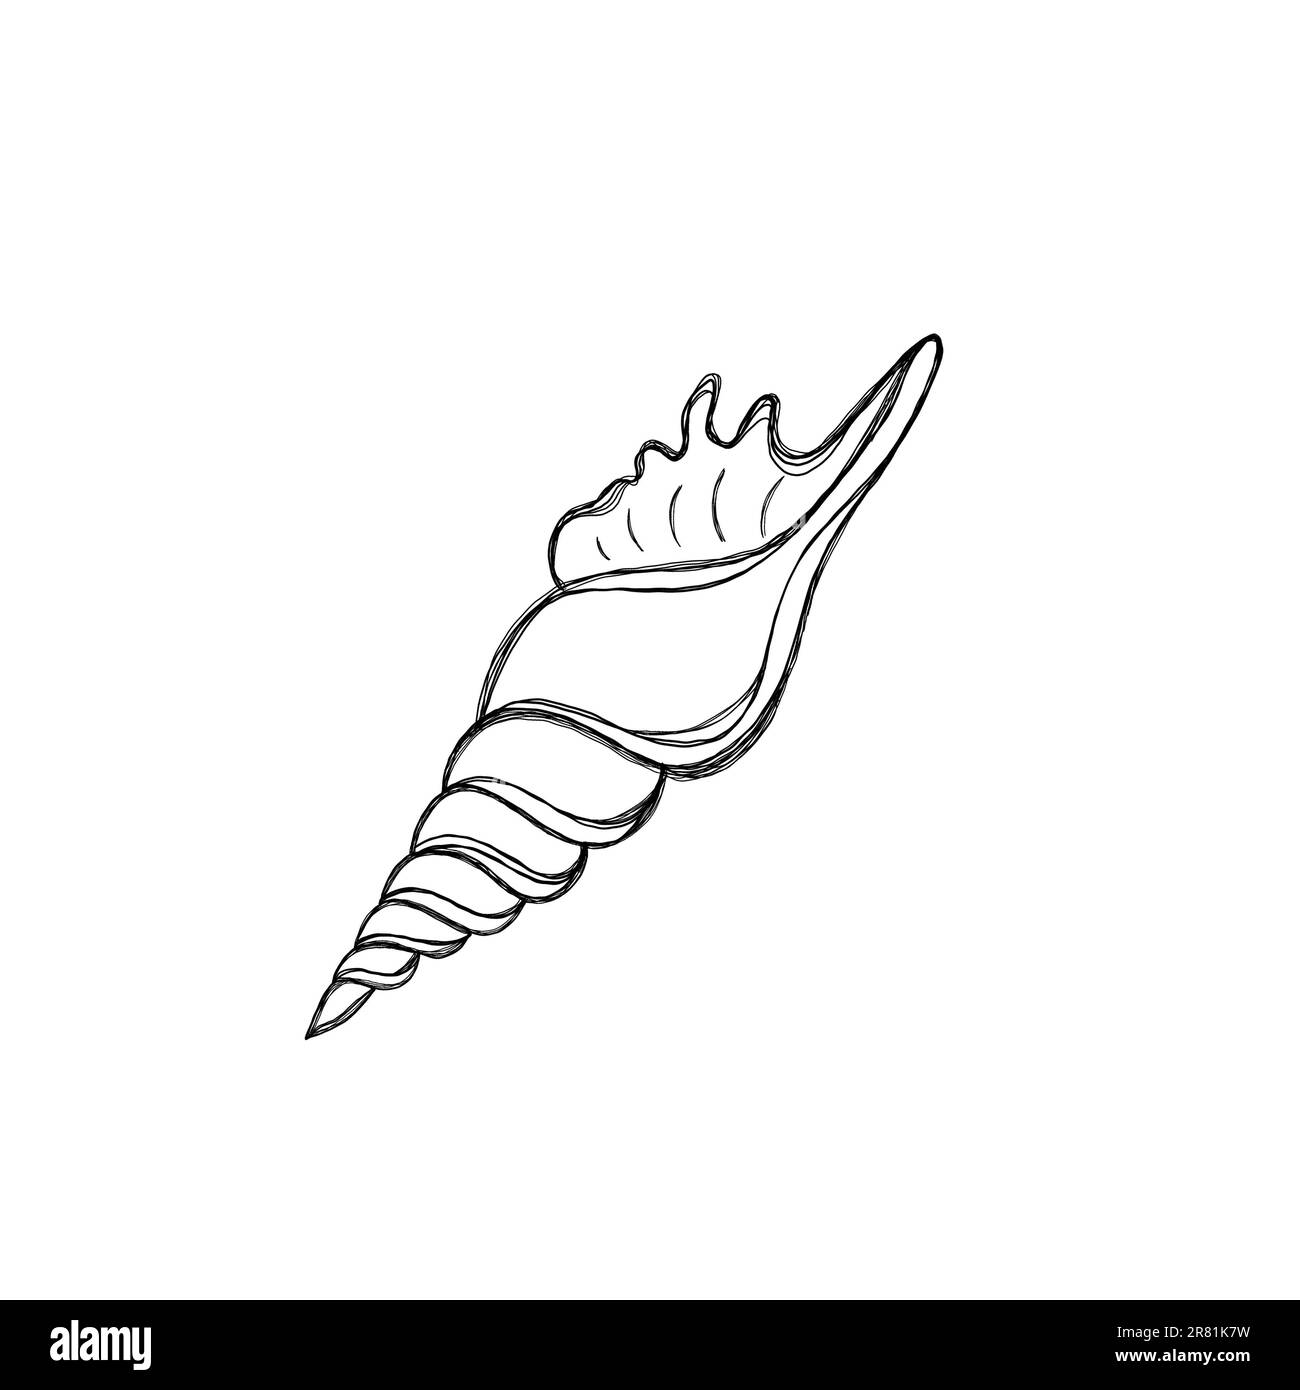 Line art illustration of a seashell. Shell tattoo idea. Hand drawn nautical engraving of nautical prints isolated on white background Stock Photo